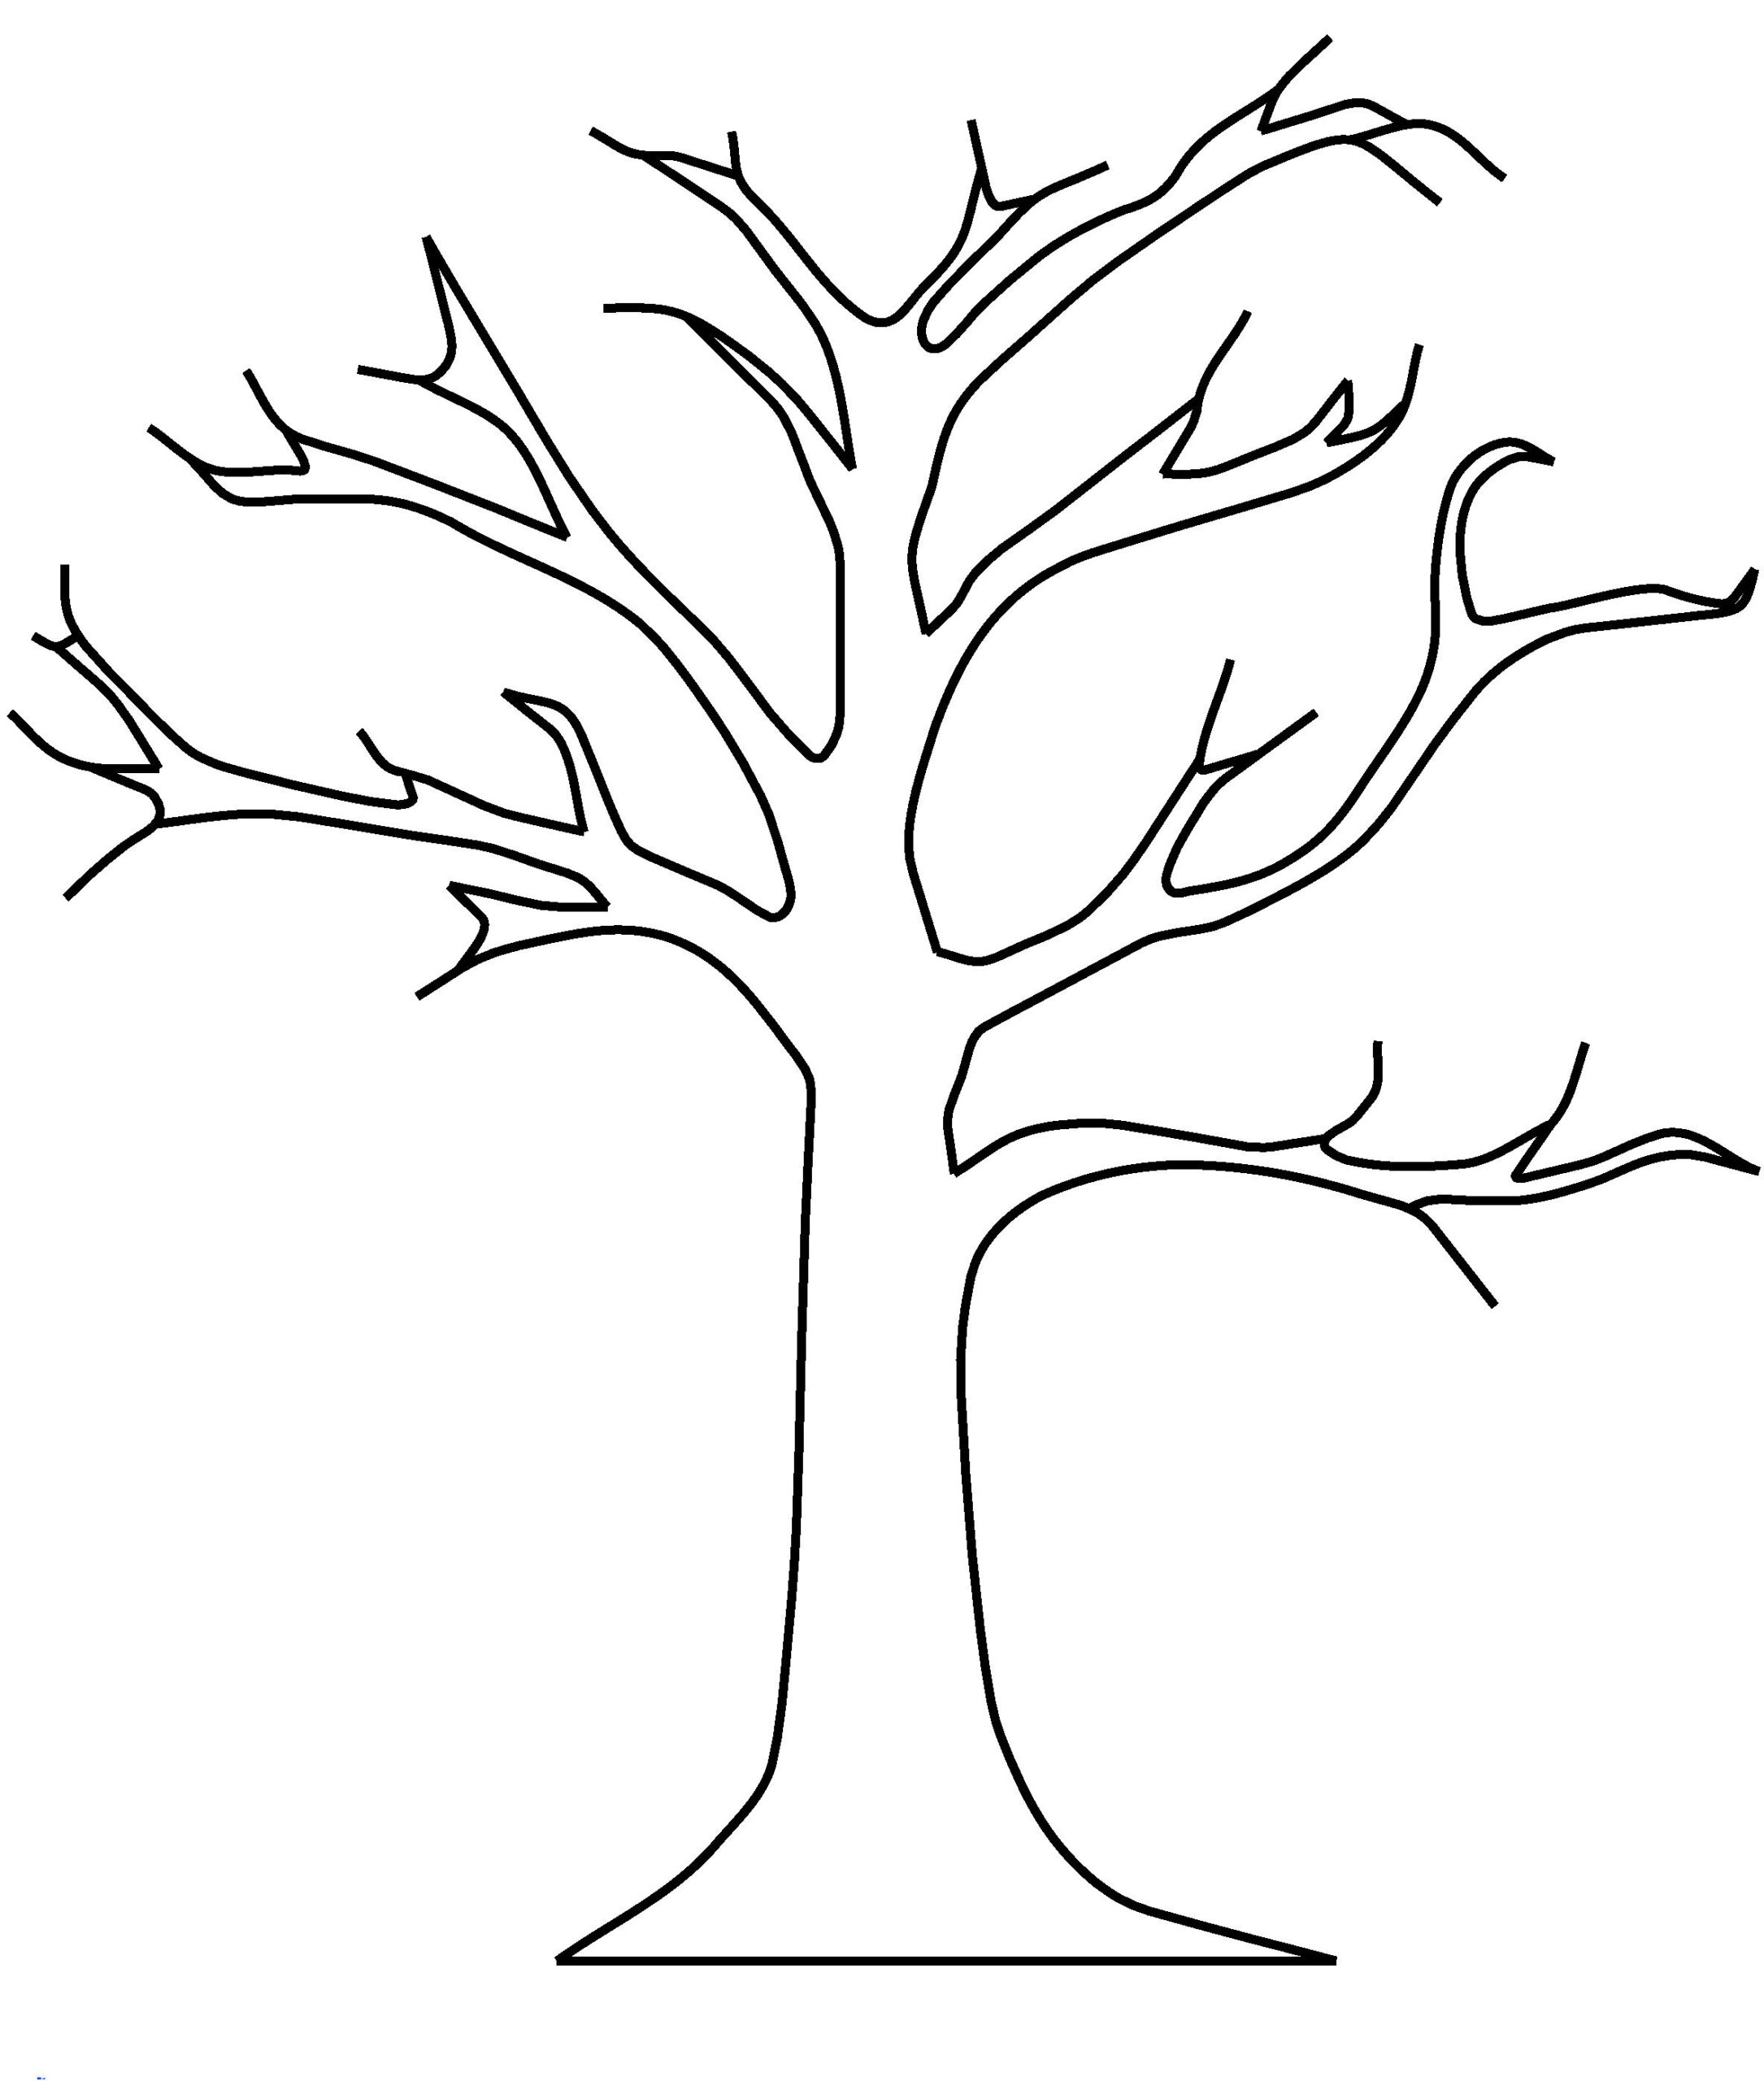 Apple Tree Template dgn Apple Tree Without Leaves Coloring Pages 